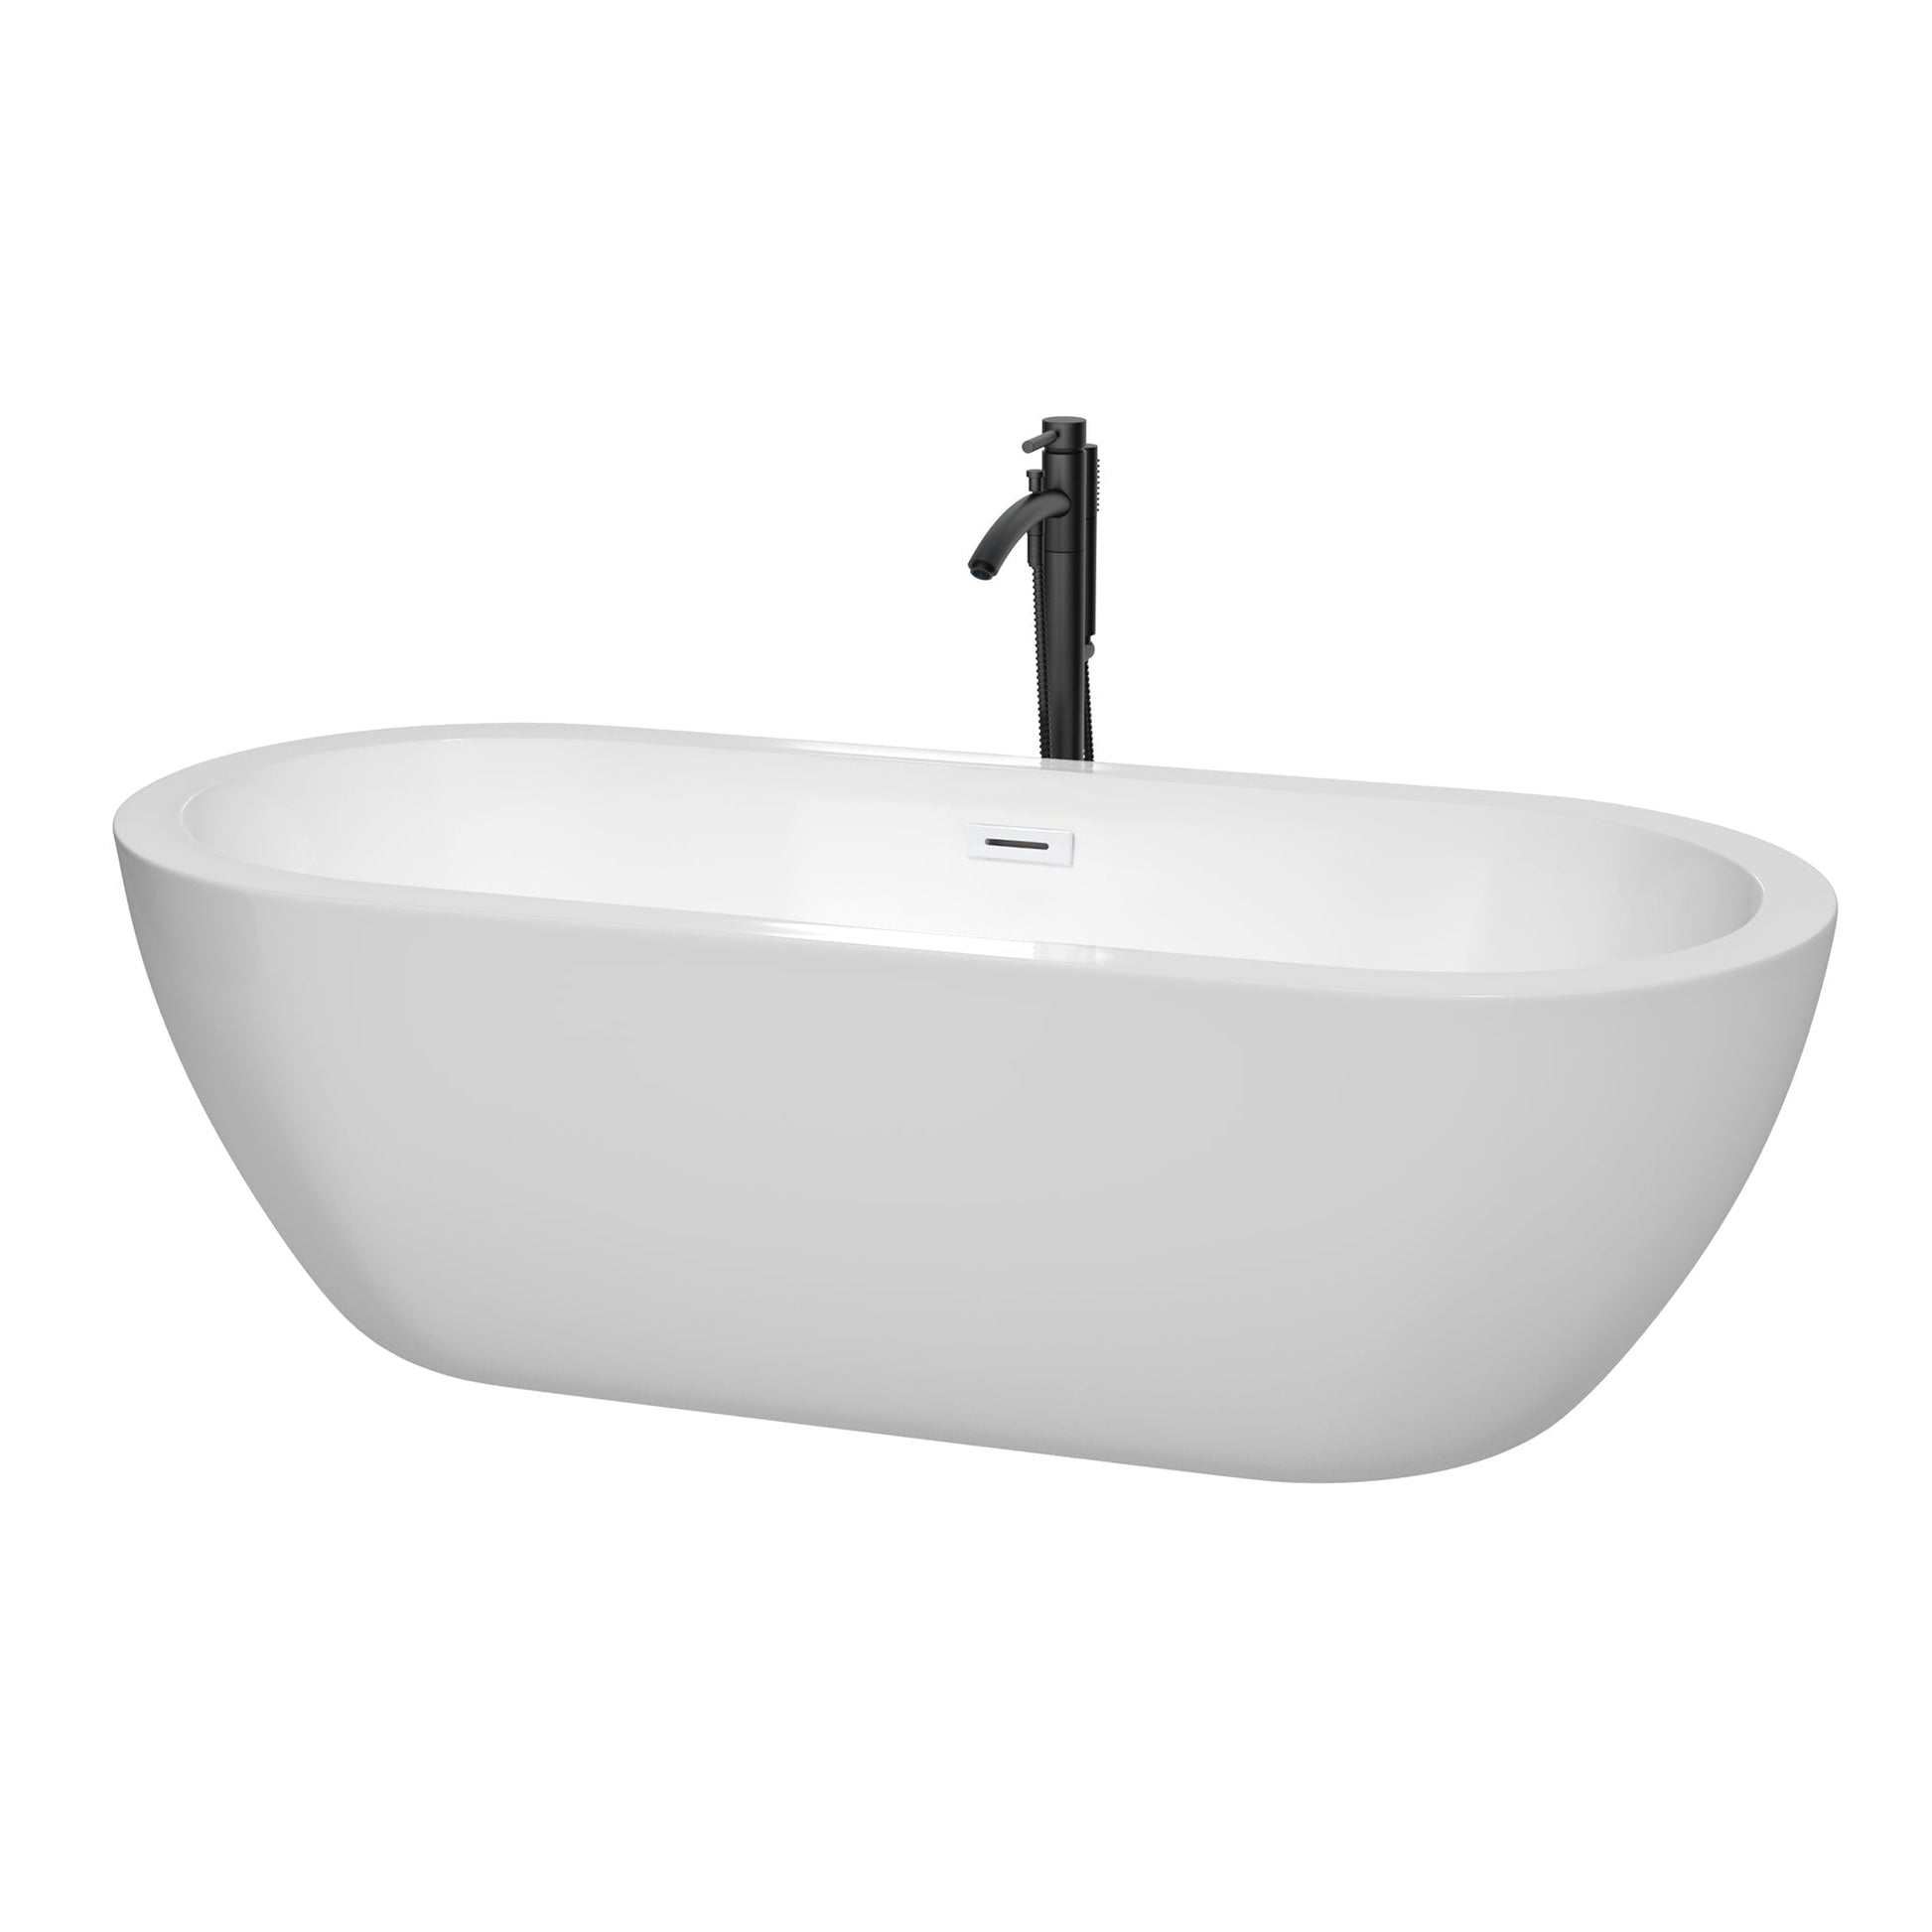 Wyndham Collection Soho 72" Freestanding Bathtub in White With Shiny White Trim and Floor Mounted Faucet in Matte Black